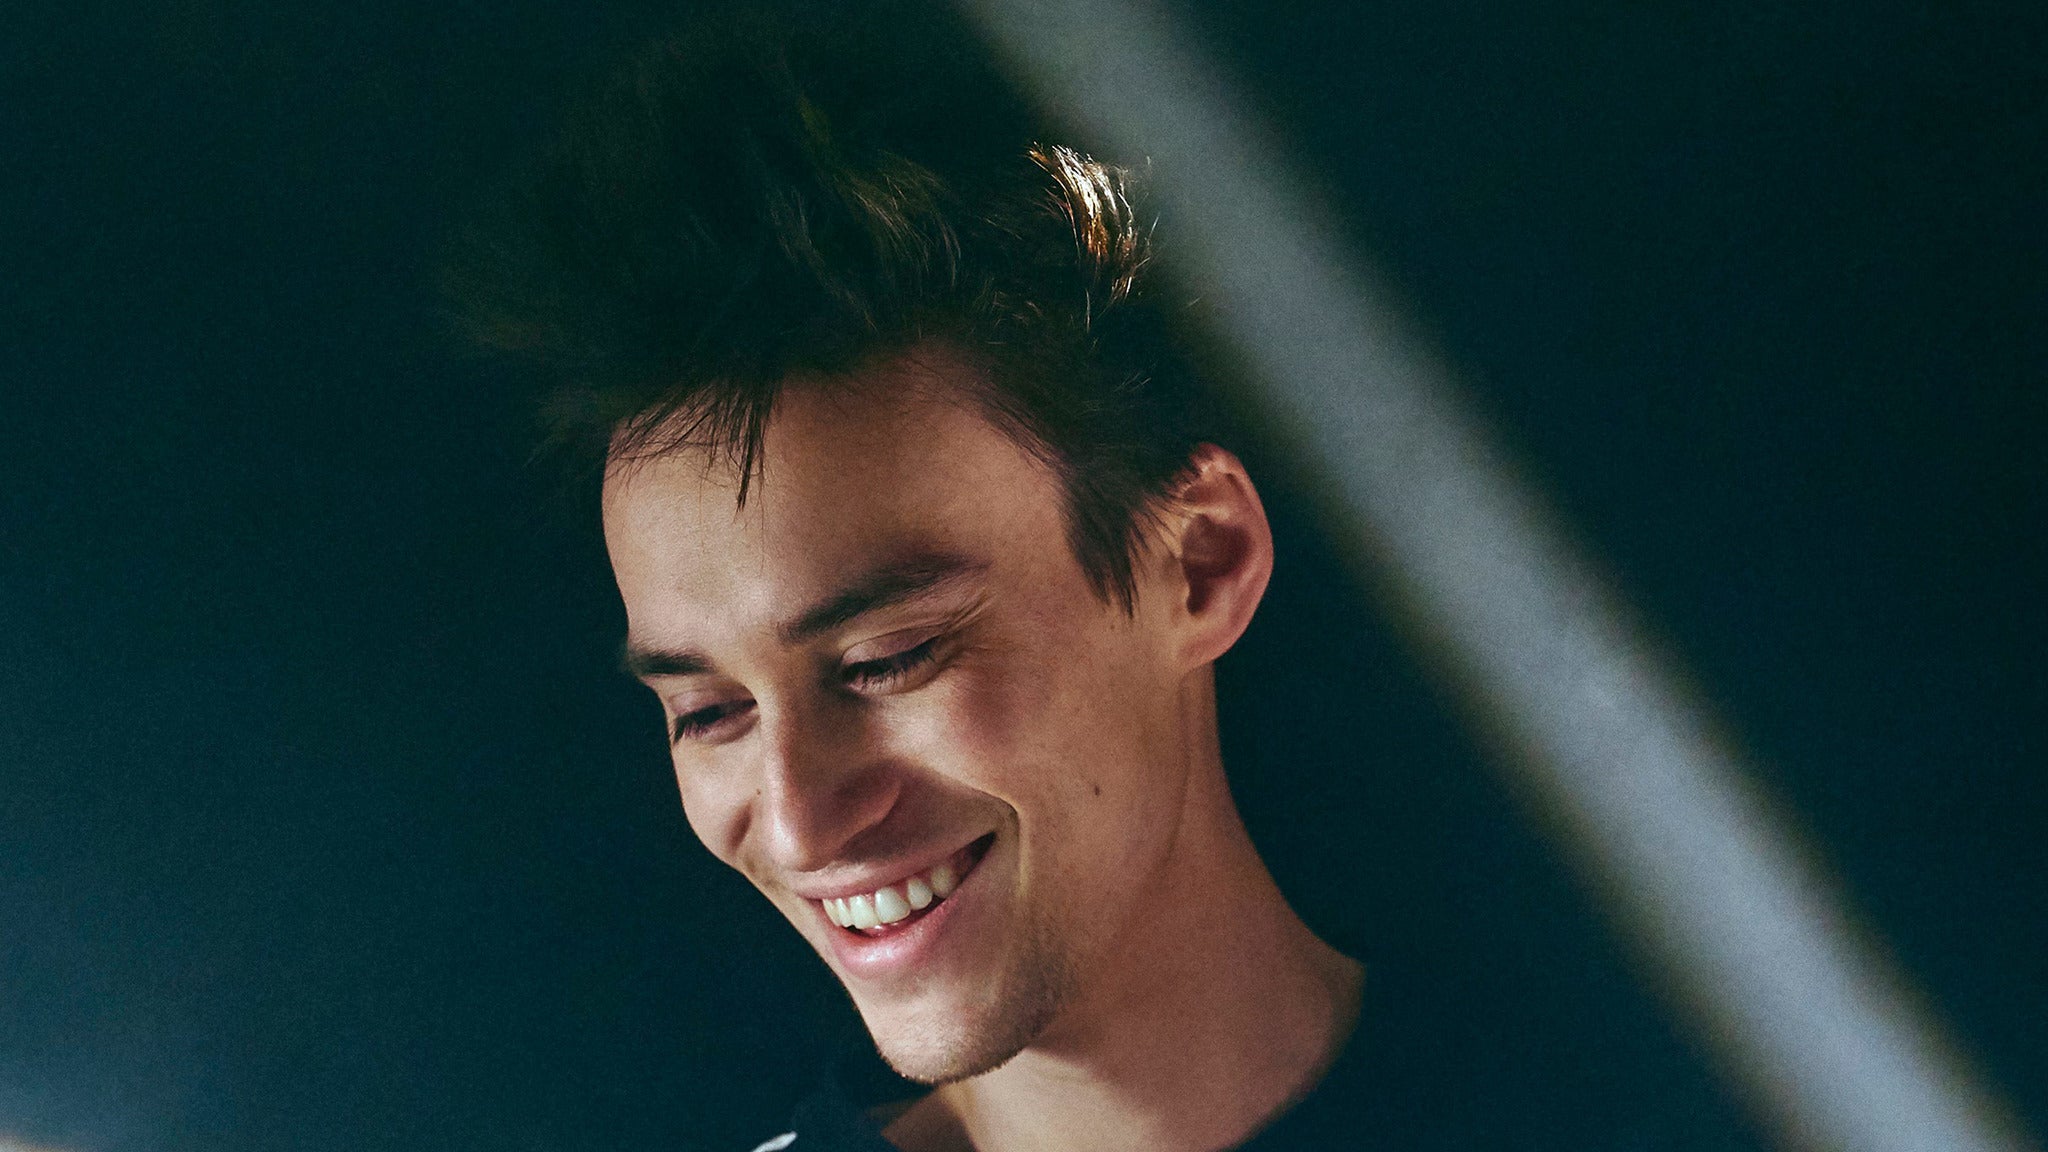 Jacob Collier - DJESSE WORLD TOUR SPRING 2022 - MOVED TO HISTORY in Toronto promo photo for Live Nation presale offer code